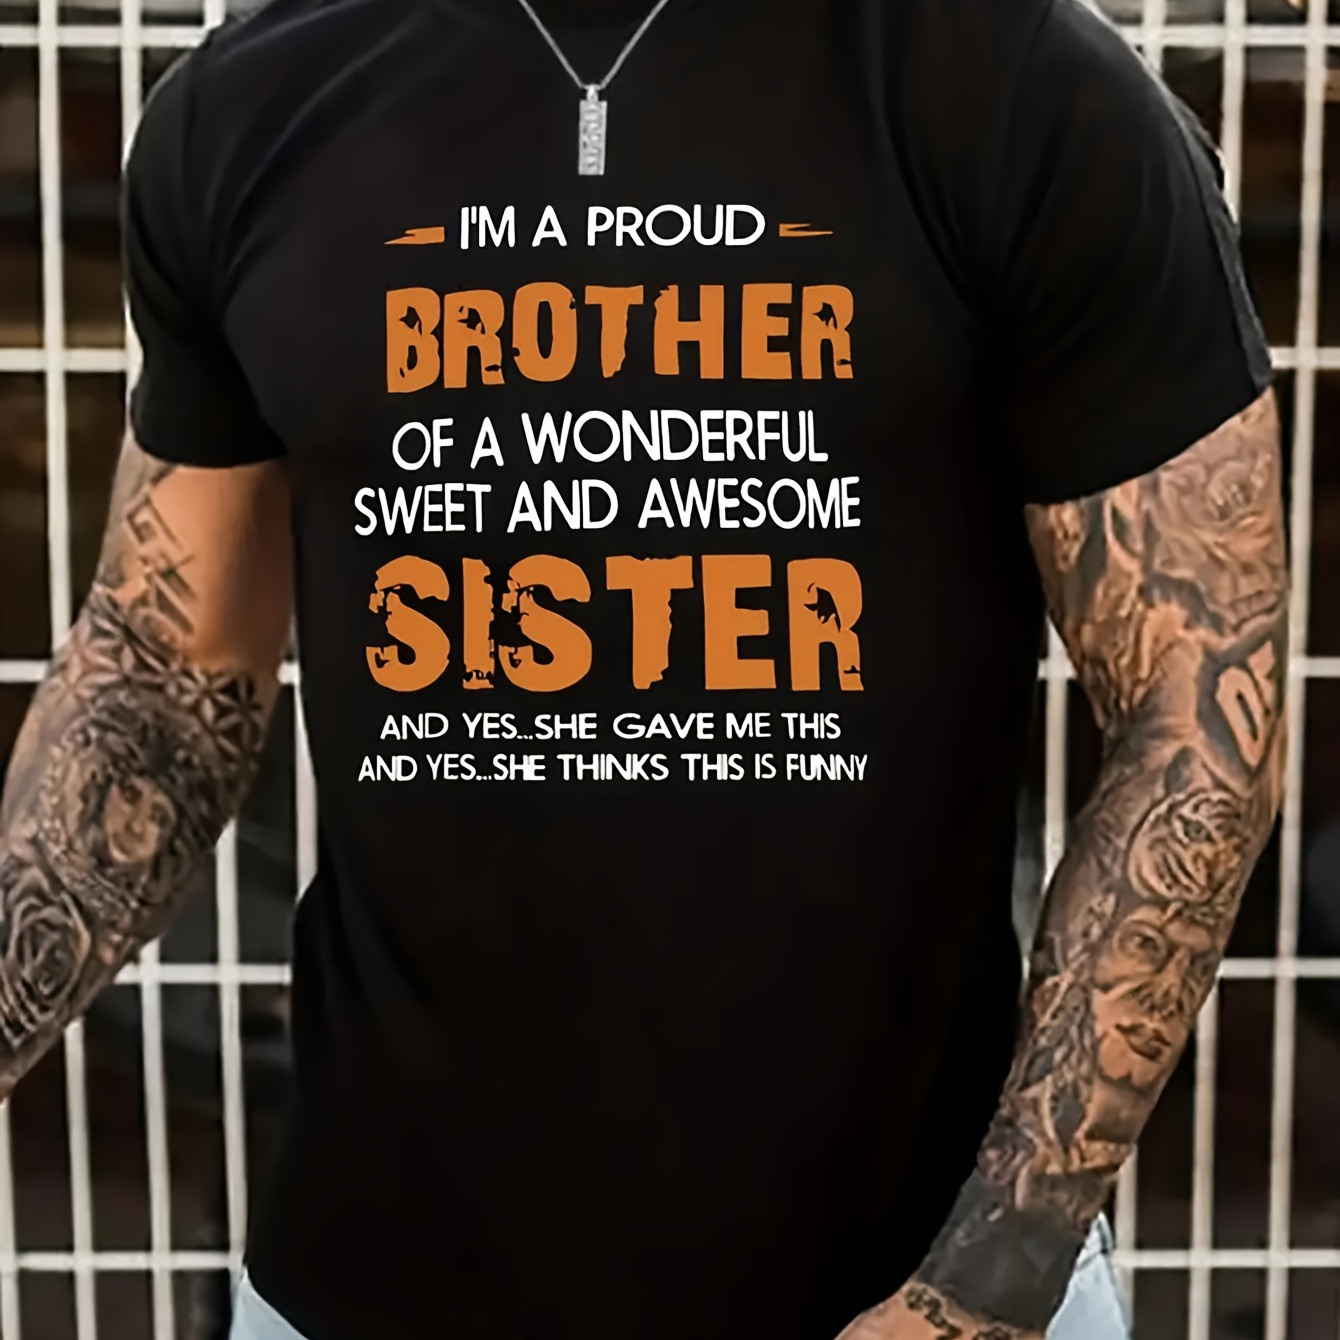 

I'm A Proud Brother Of A Wonderful Sweet And Awesome Sister Print, Men's Crew Neck Short Sleeve Summer T-shirt, Casual Comfy Cotton Top For Daily Wear